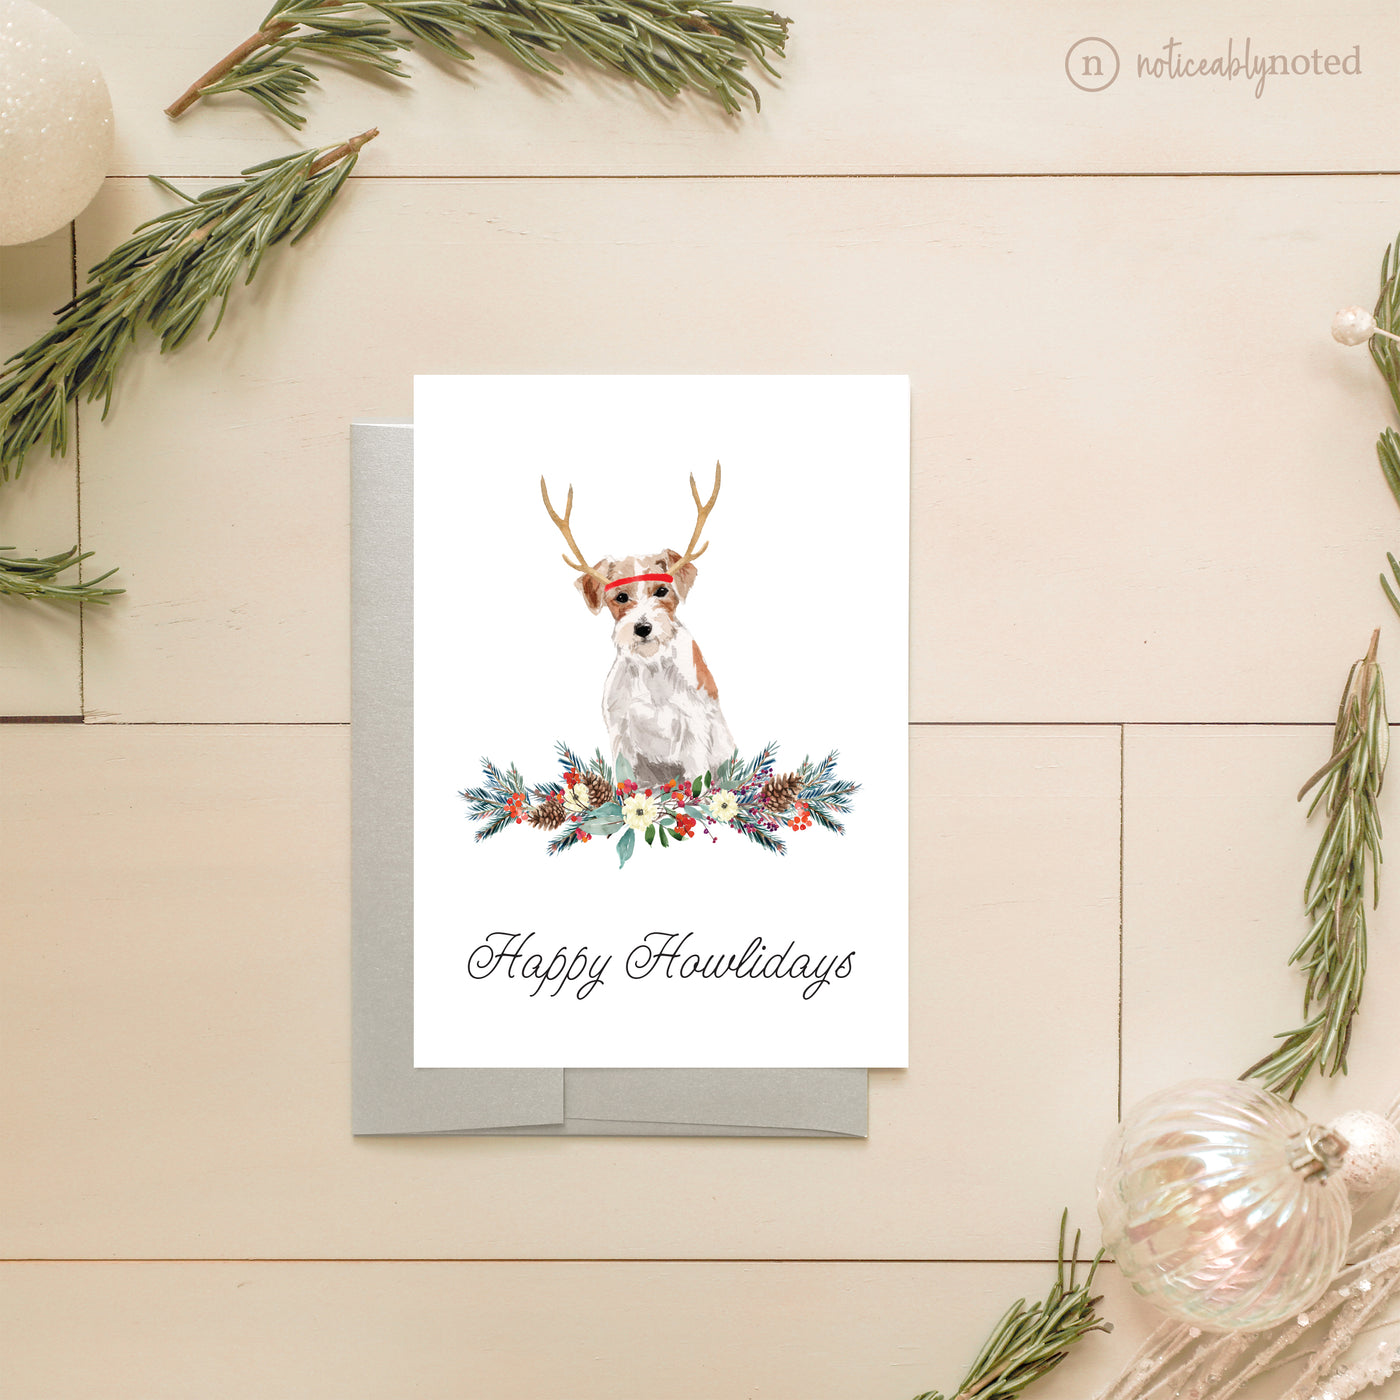 Jack Russell Dog Holiday Card | Noticeably Noted